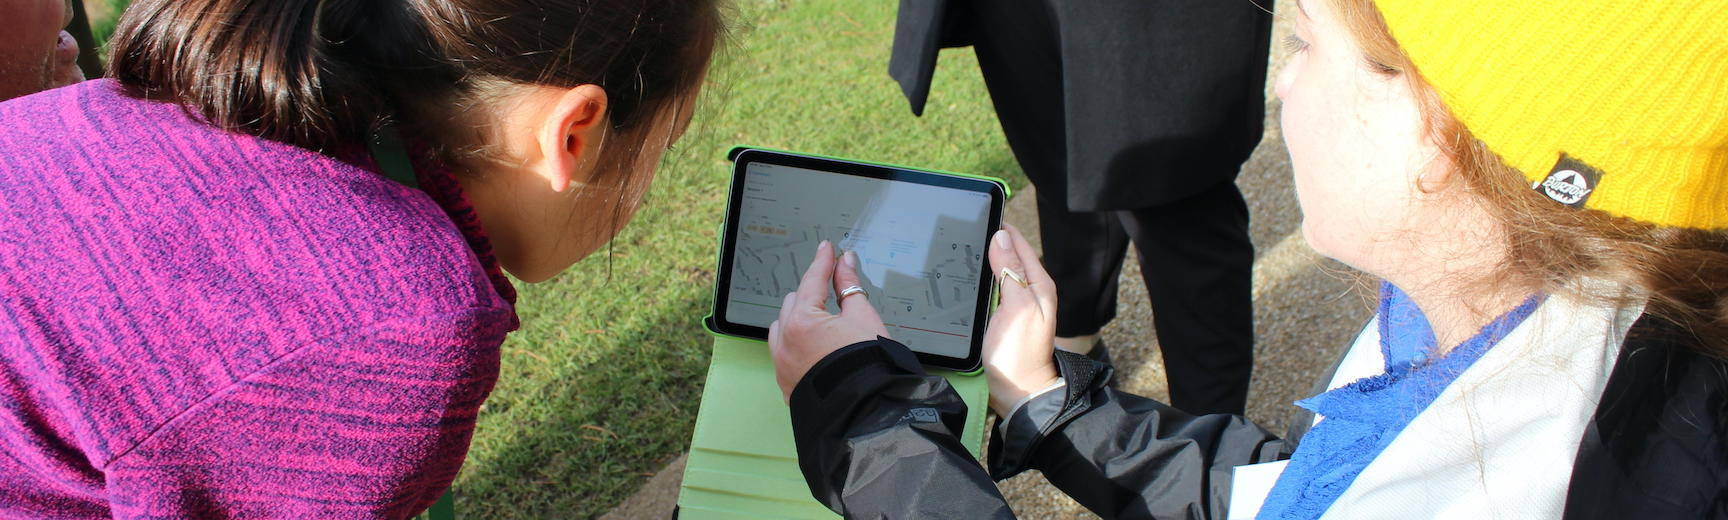 A child watches as a researcher explains data on an ipad screen outside on a sunny day